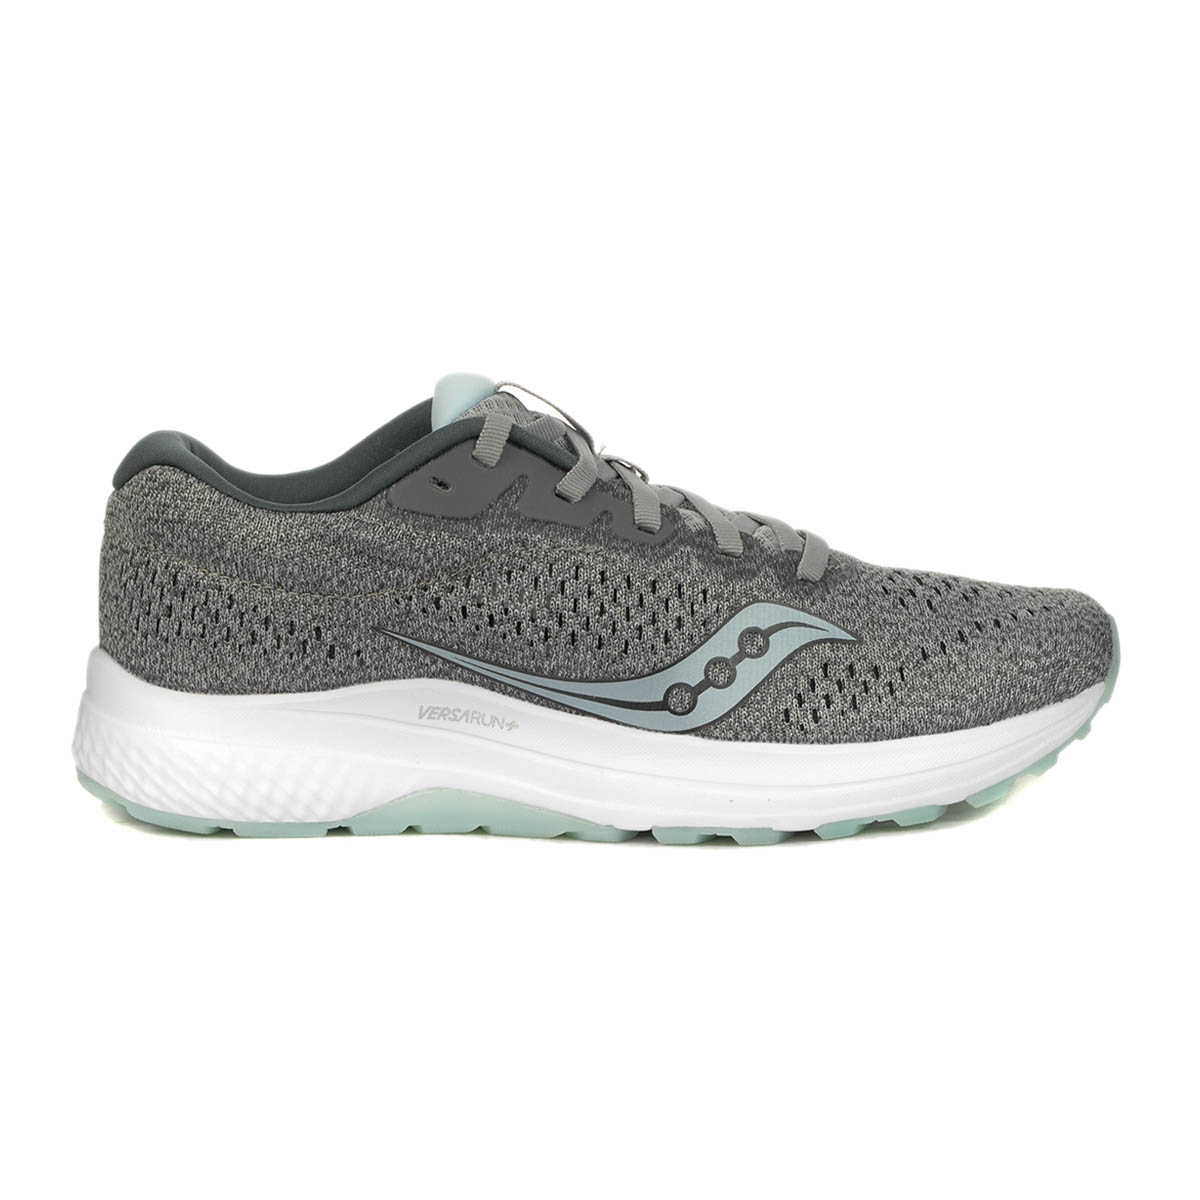 Saucony Women's Clarion 2 Alloy/Sky Running Shoes S10553-11 - WOOKI.COM